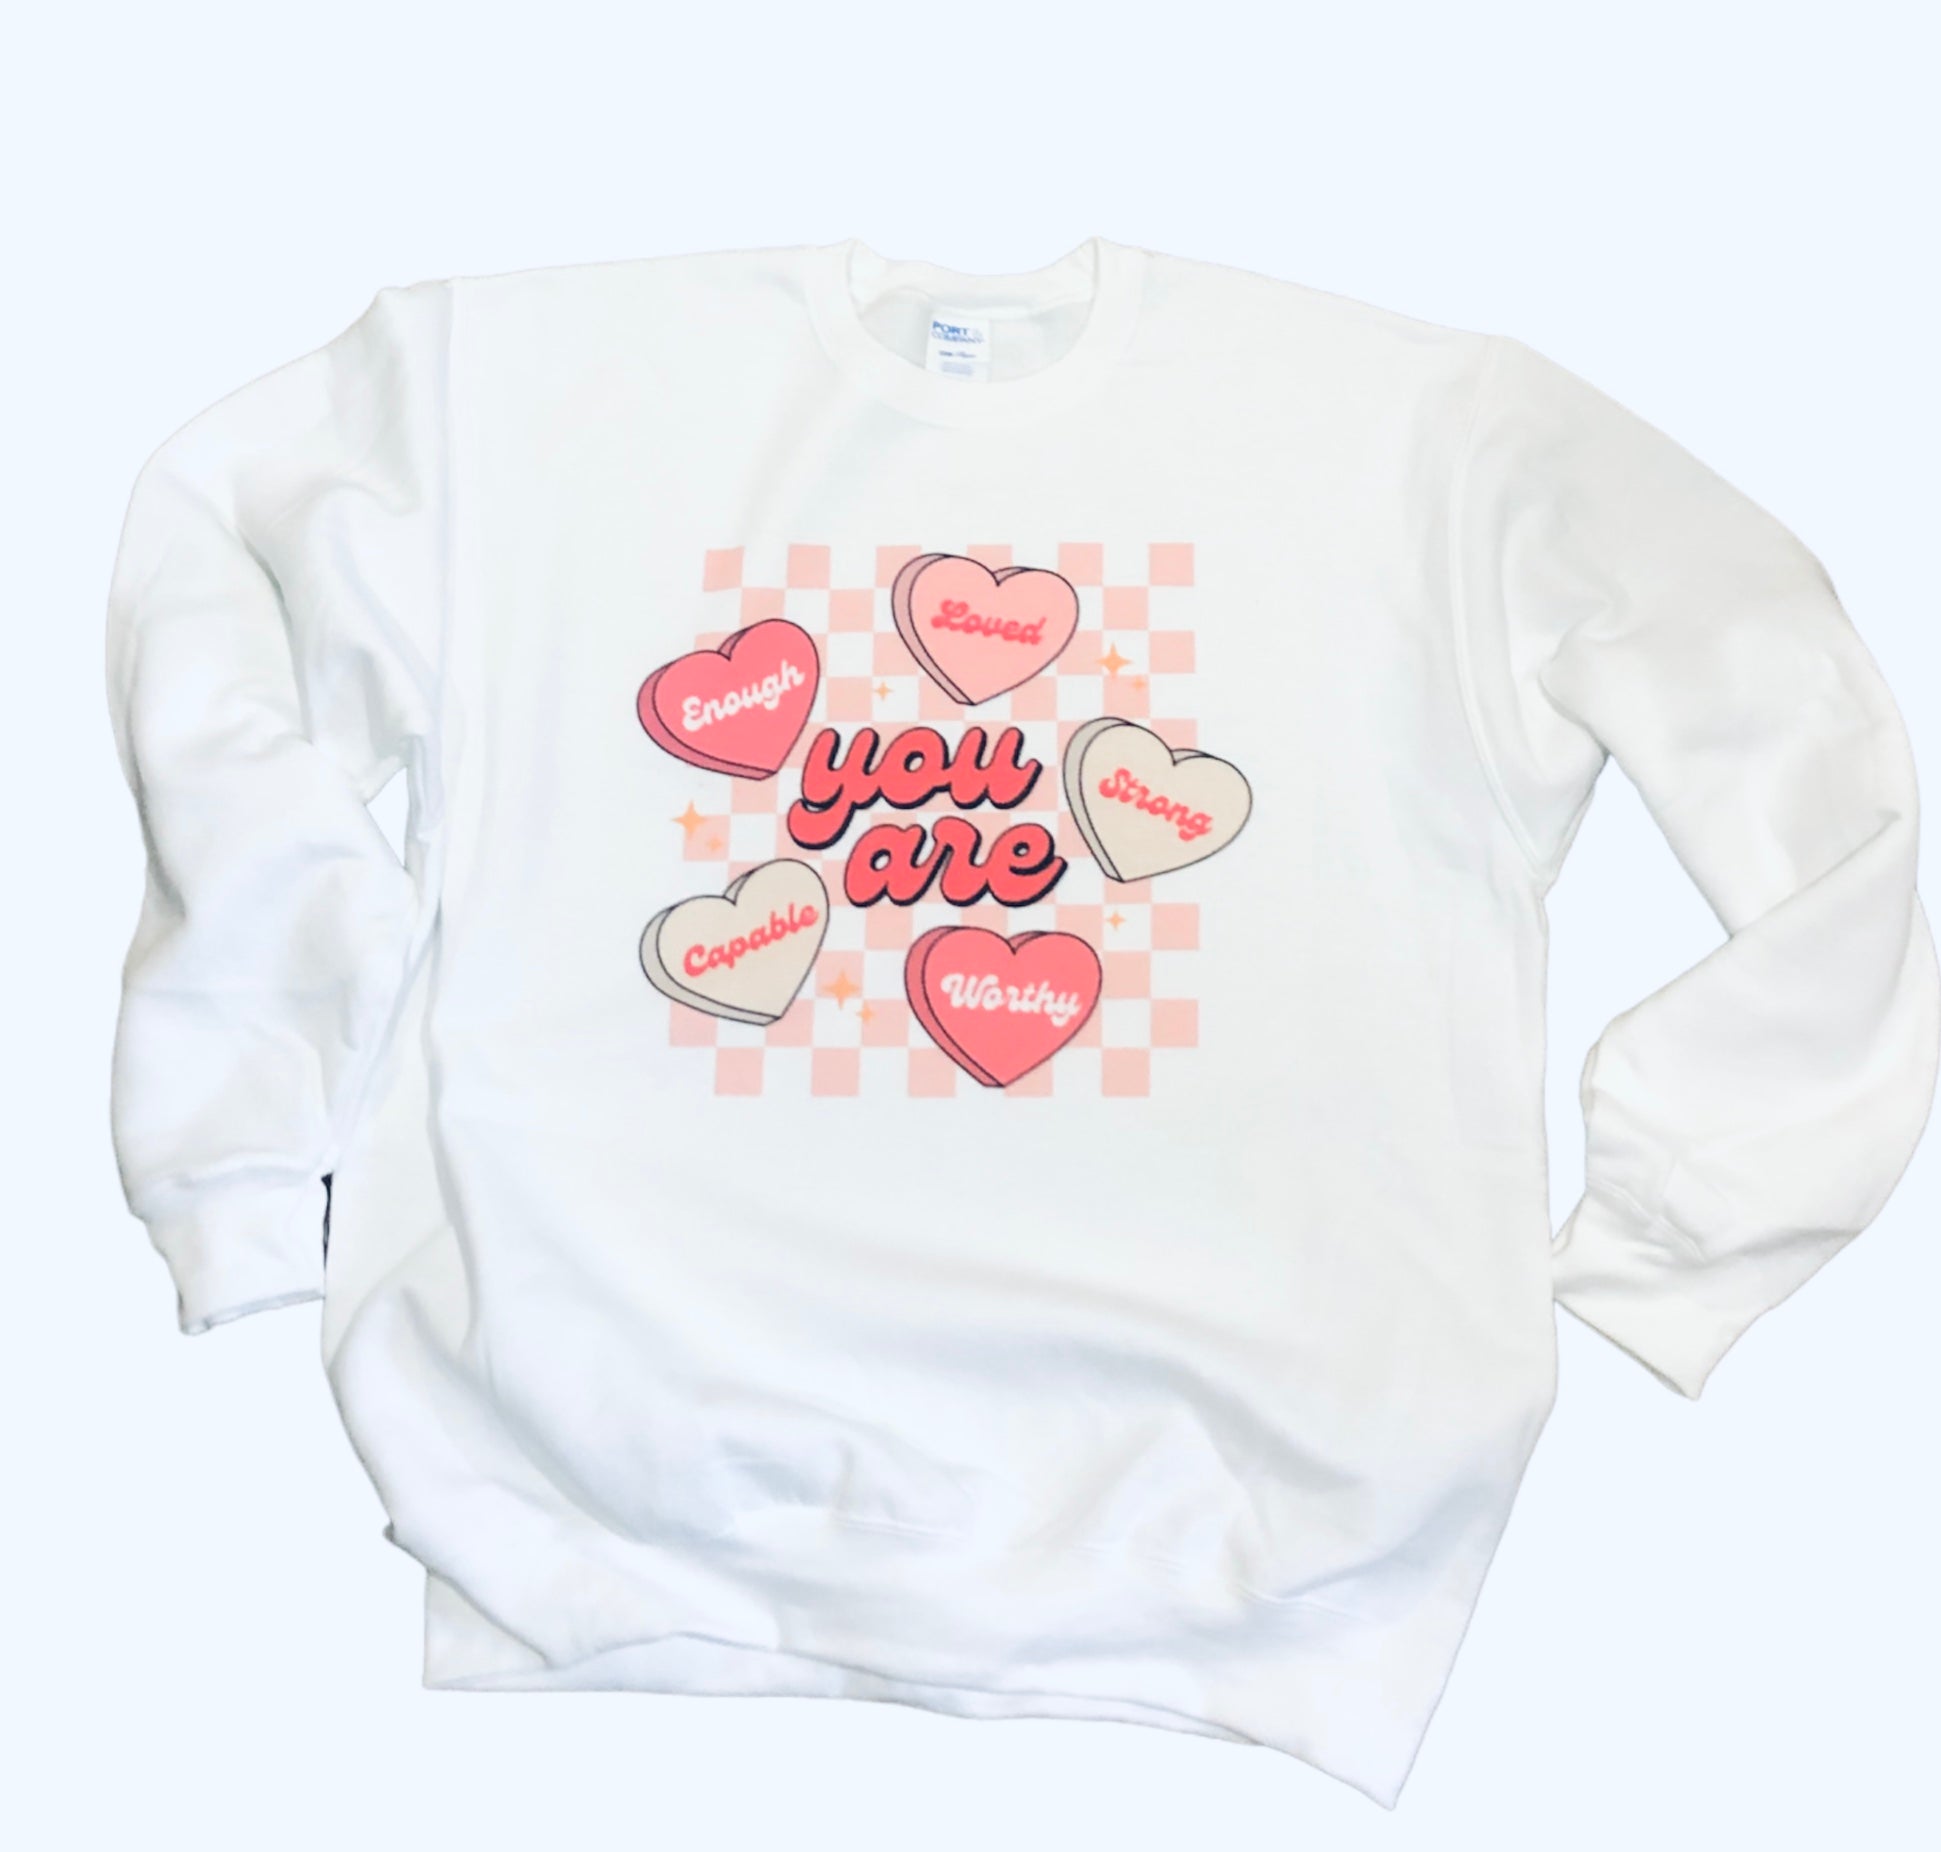 You are Valentine Candy Sweatshirt ~ enough, loved, strong, capable and worthy